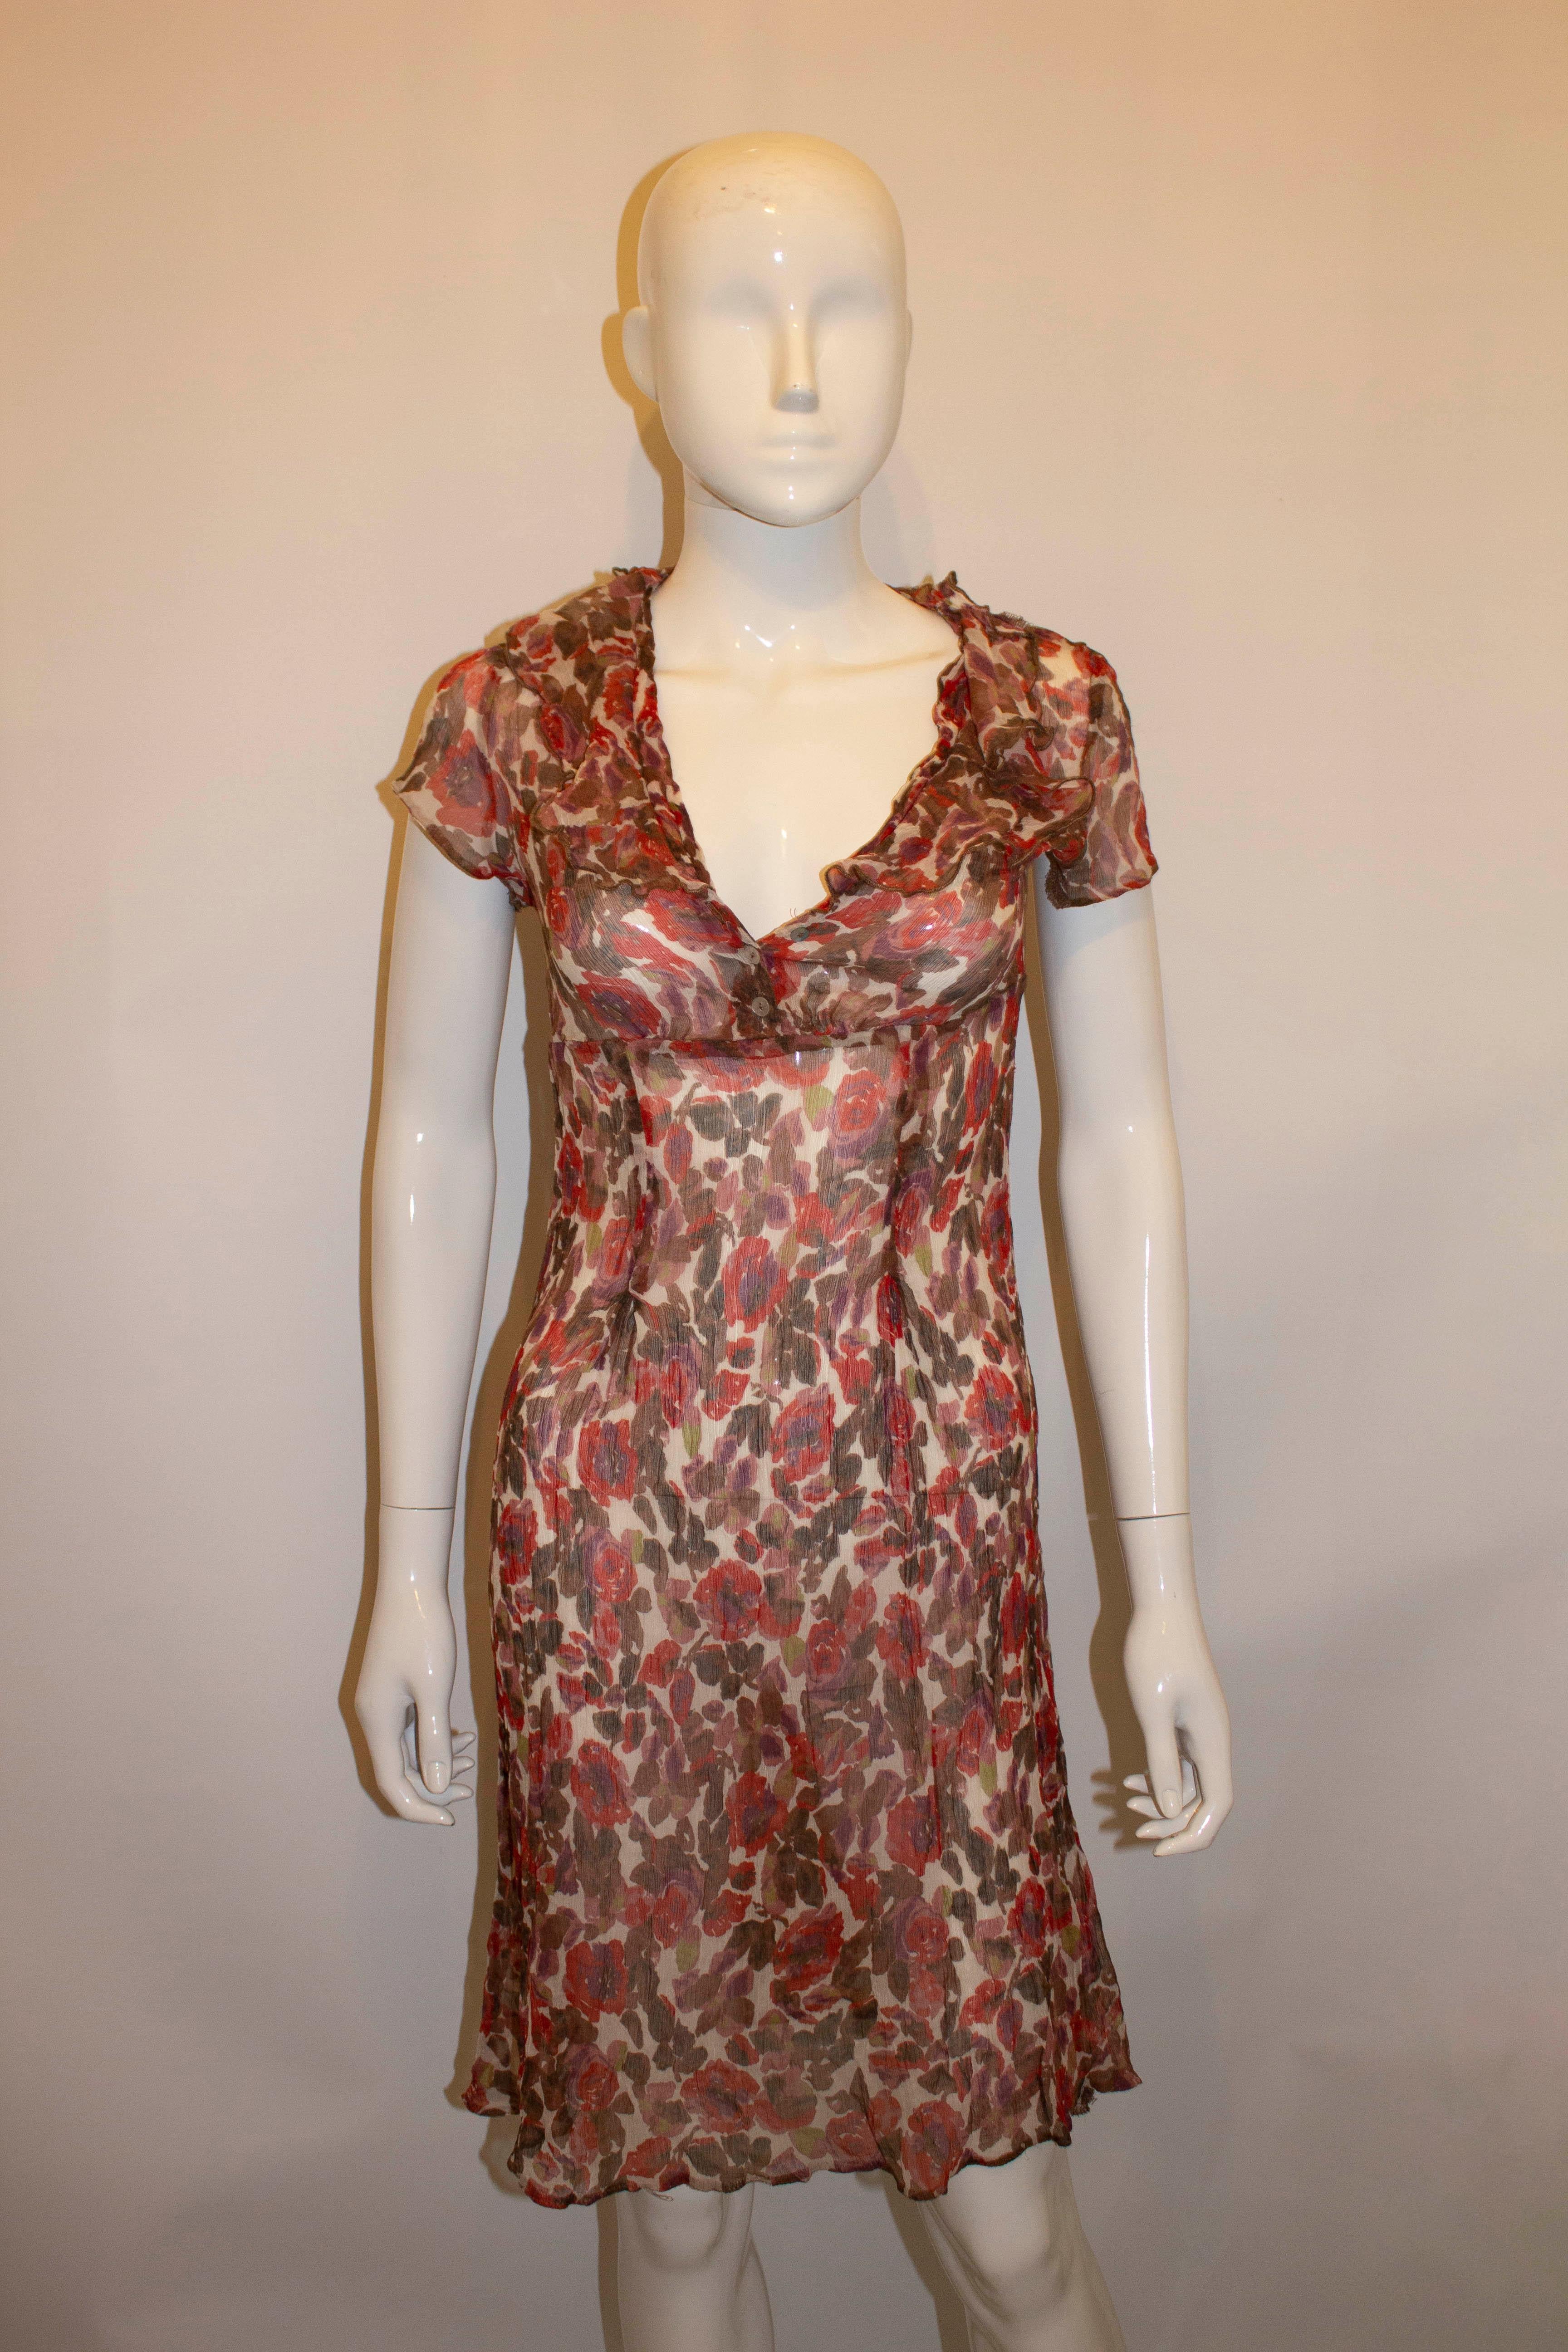 A pretty silk chiffon tea dress with a button front and ruffles around the kneck. The dress has ca sleaves and a self fabric tie back. Measurements: Bust 35/6'', length 38''